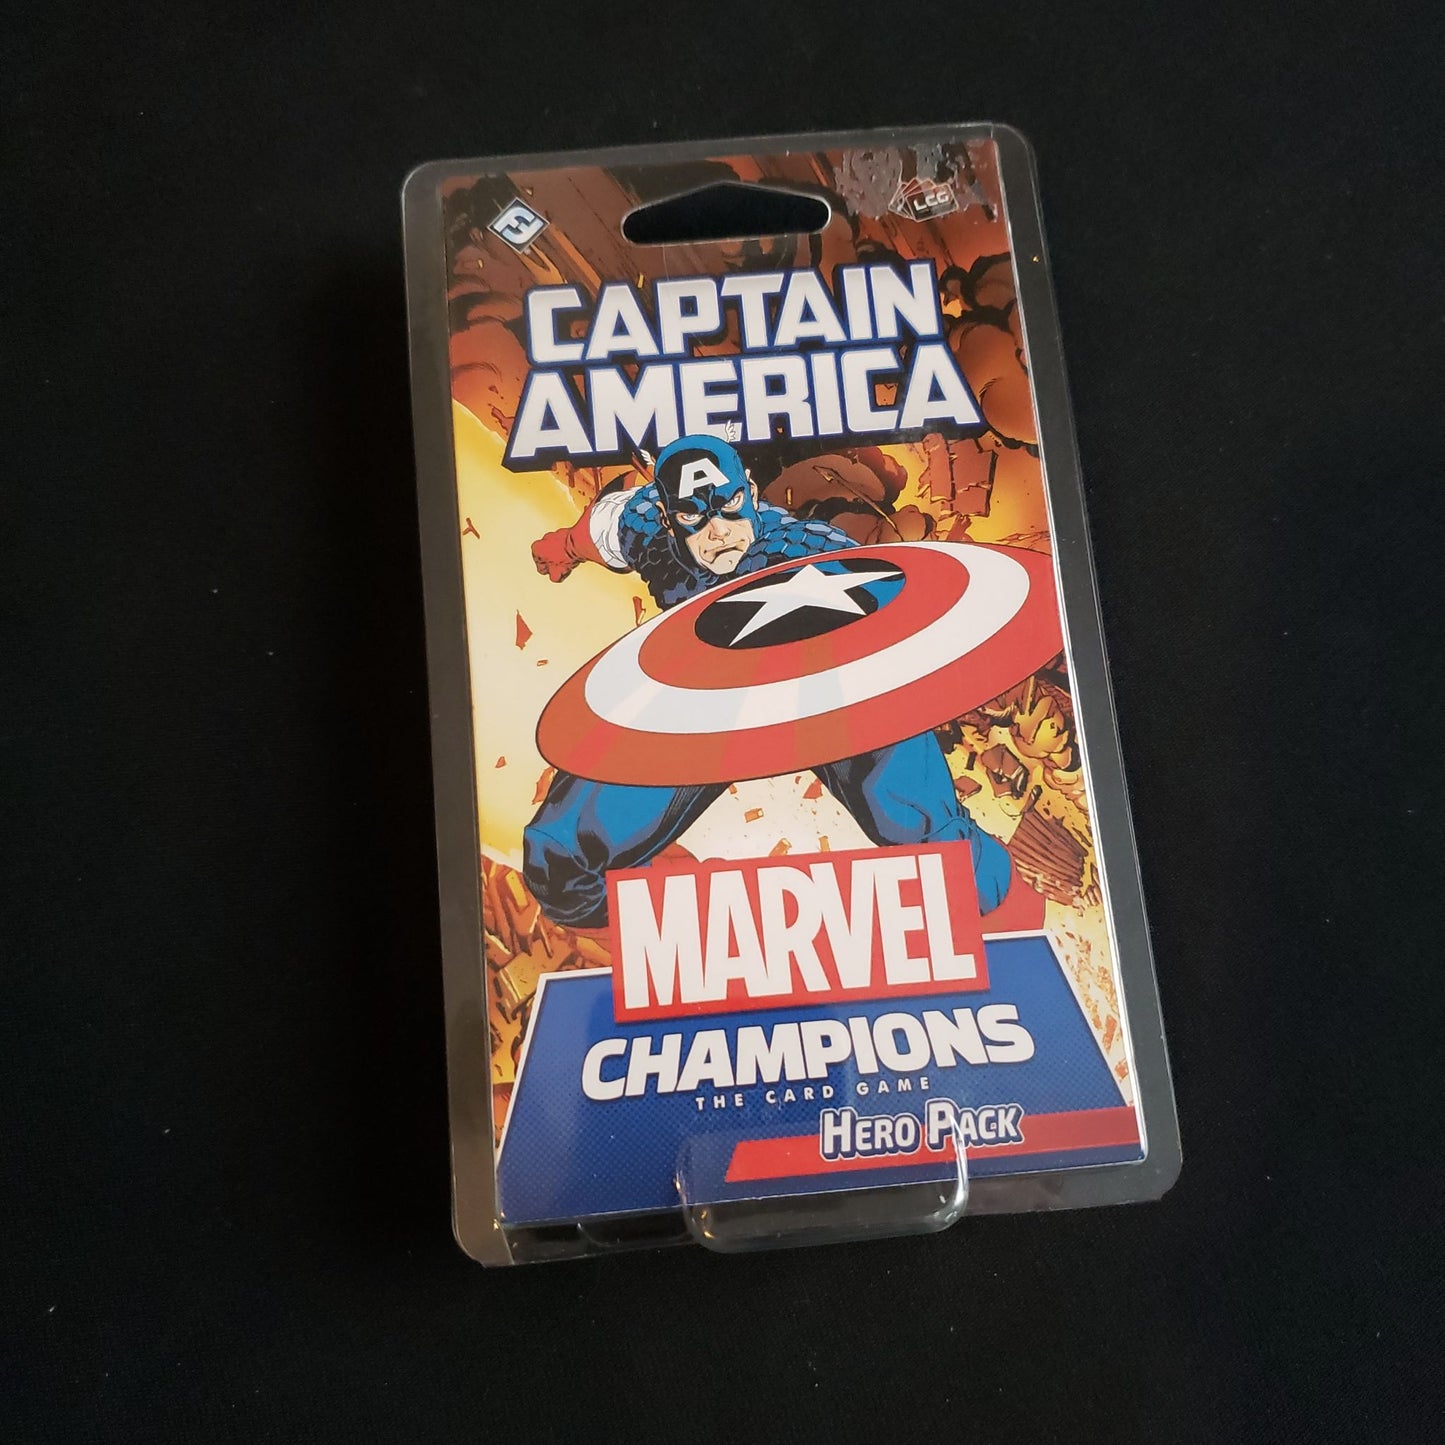 Image shows the front of the package for the Captain America Hero Pack for the Marvel Champions card game